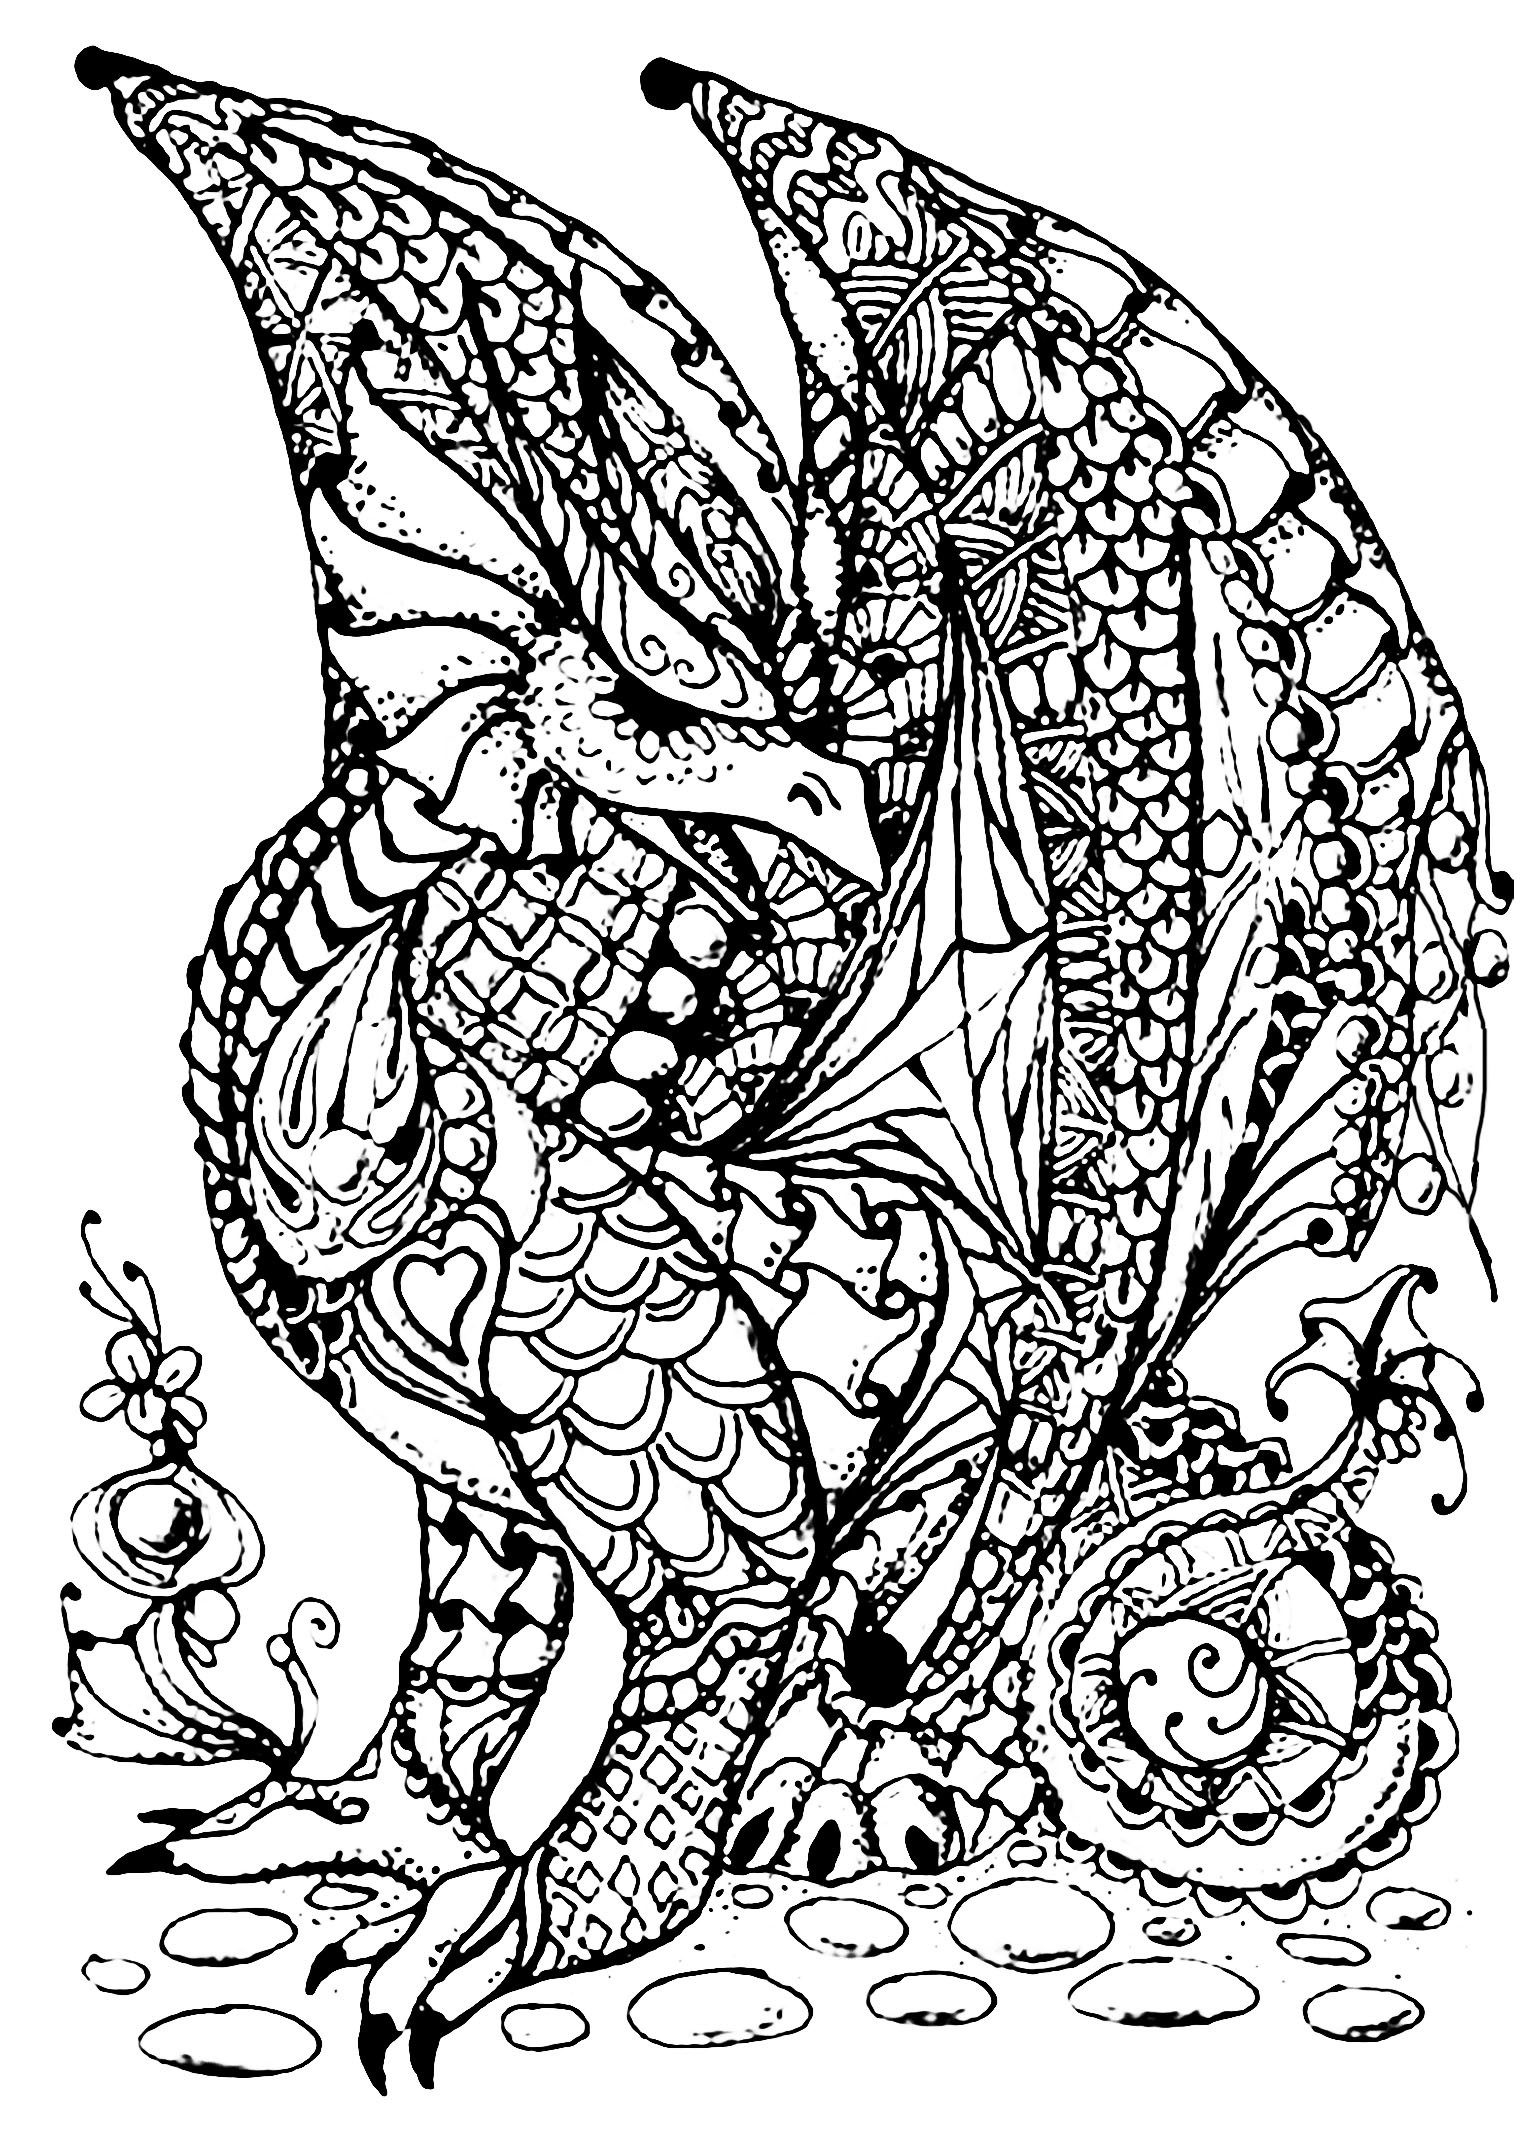 Dragon Coloring Pages For Adults
 Dragon full of scales Dragons Adult Coloring Pages